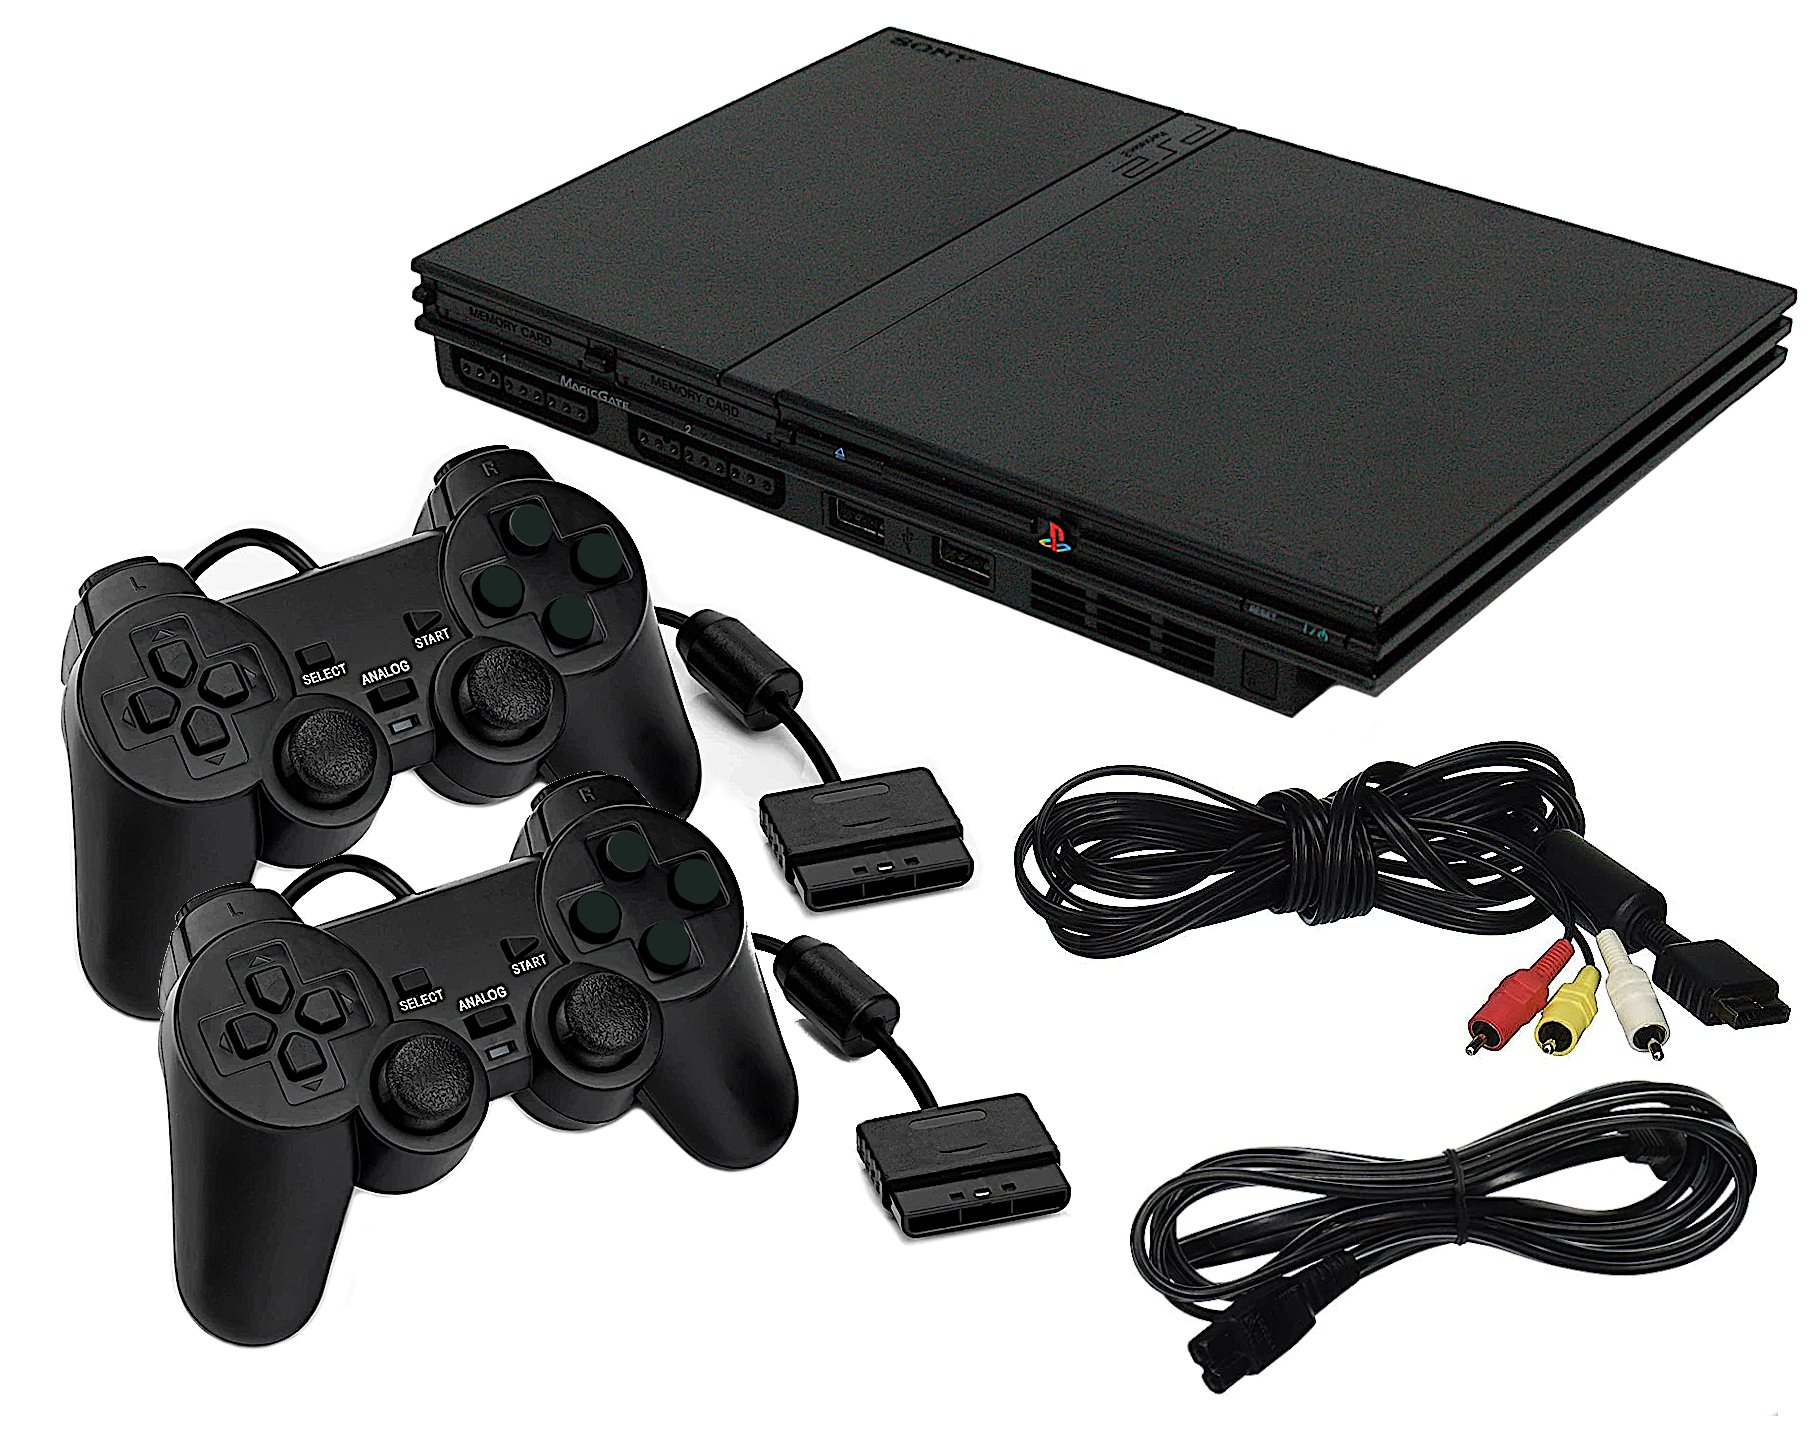 PlayStation 2 Slim Console Only PS2 Gaming and Entertainment Excellence  Manufacturer Refurbished